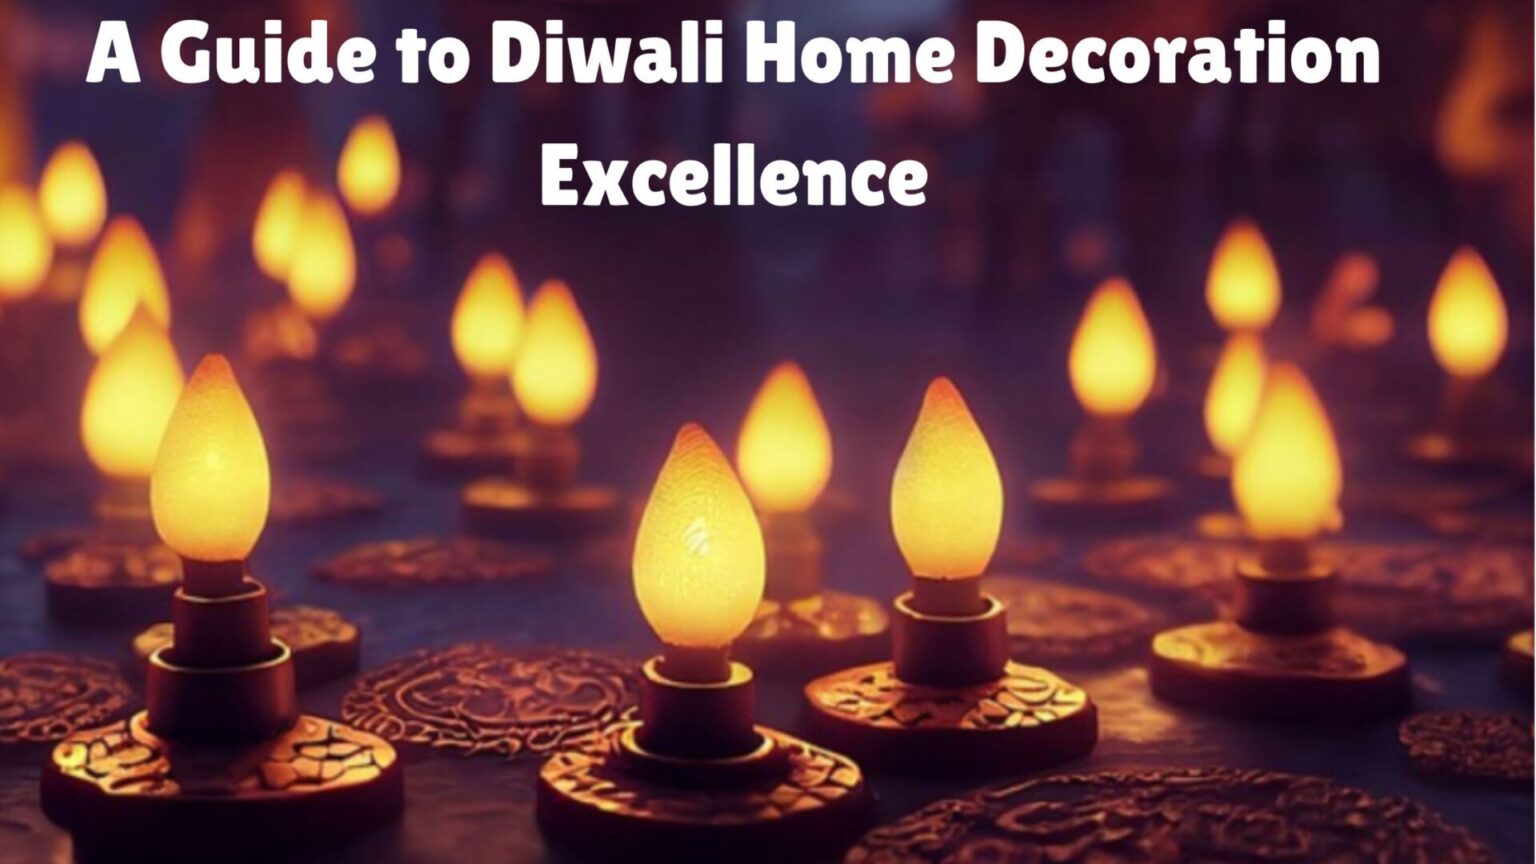 A Guide to Diwali Home Decoration Excellence